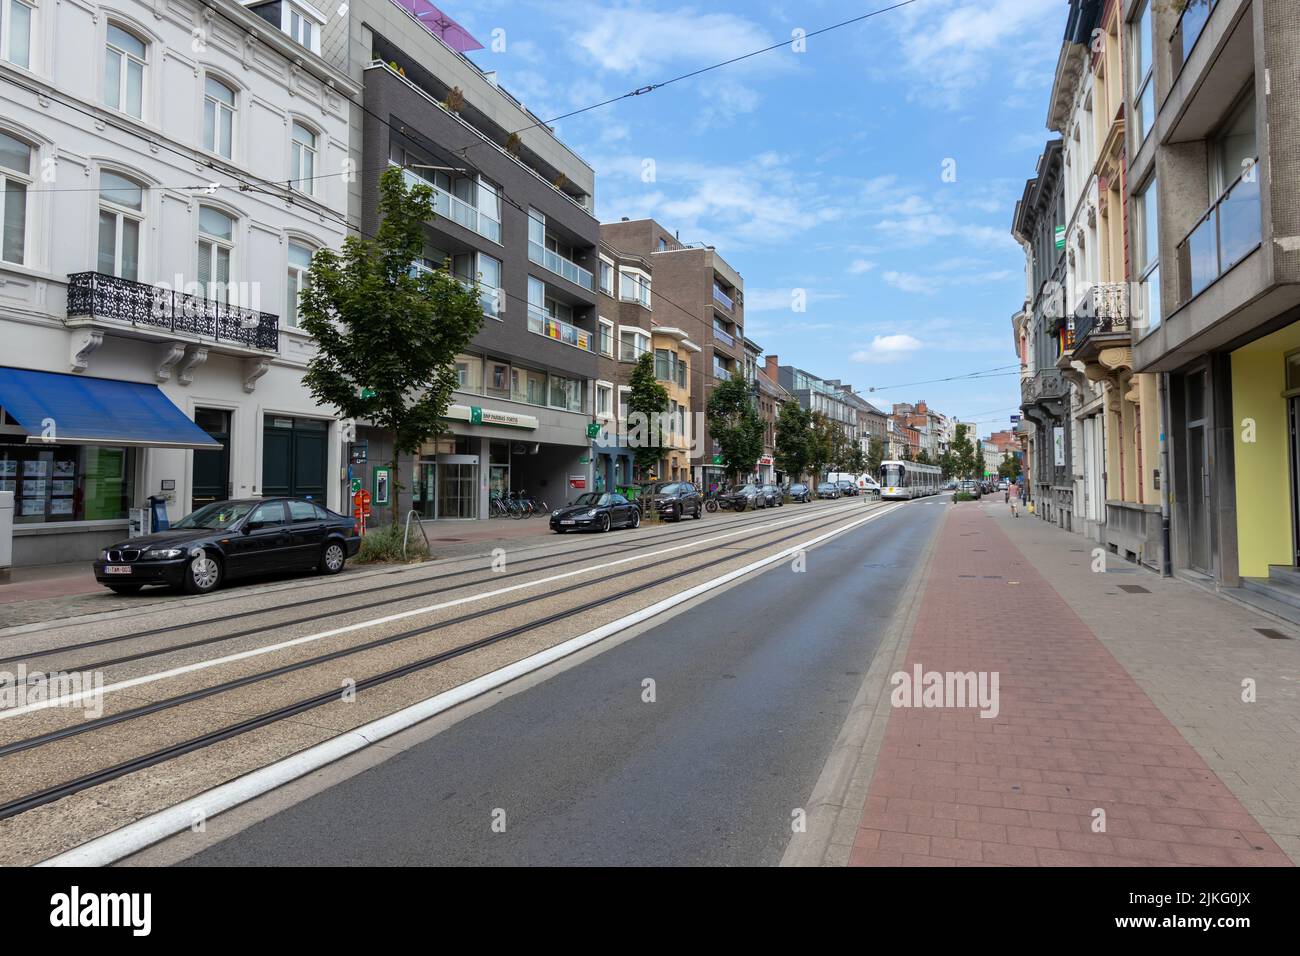 Ghent, Belgium - July 13, 2018: Koningin Elisabethlaan (Queen Elizabeth Road) with a mix of historical and modern architecture Stock Photo